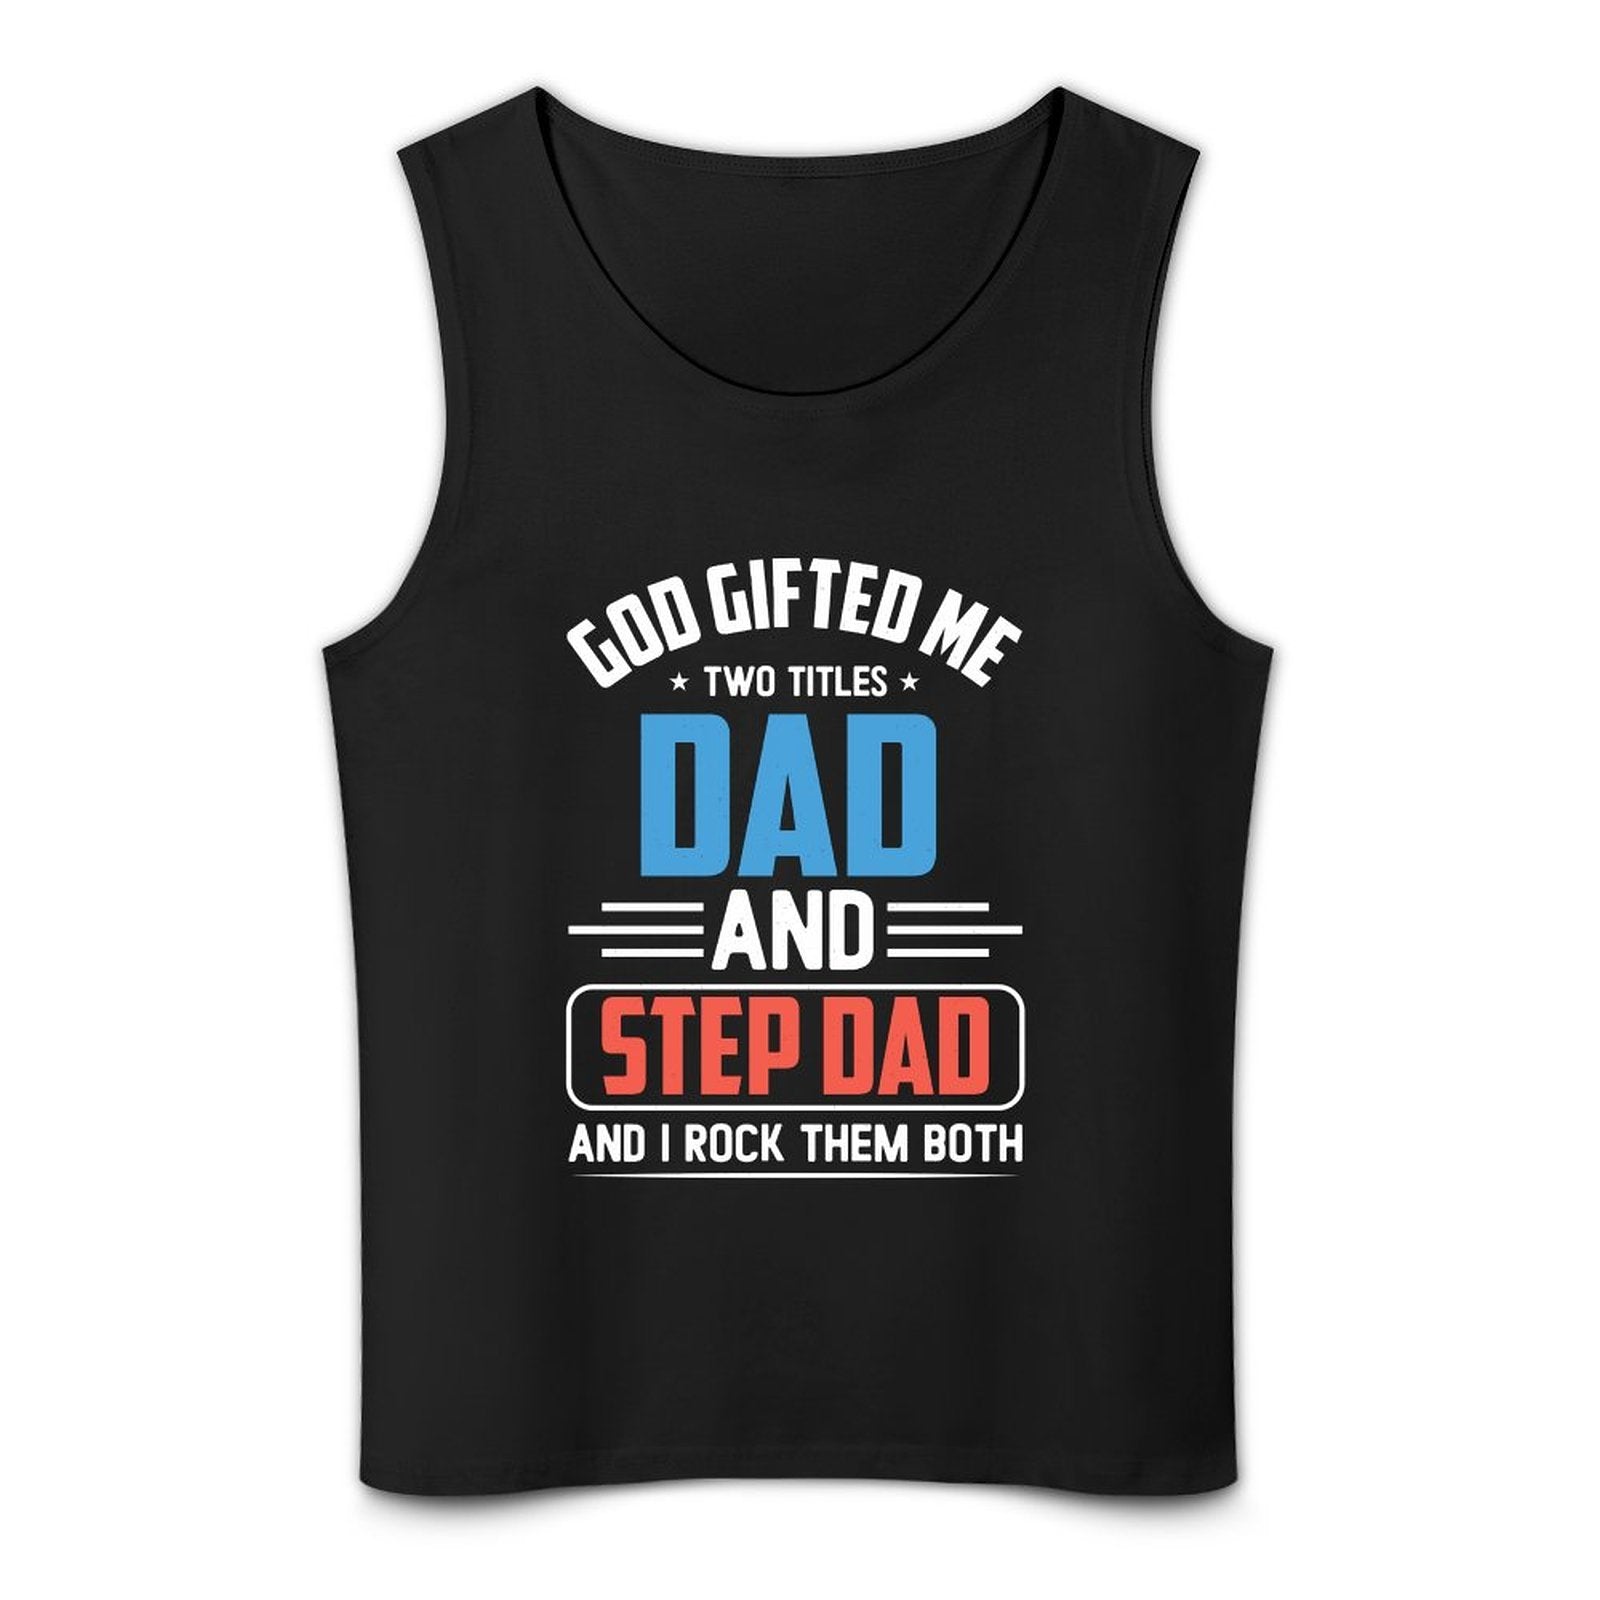 God Gifted Me Two Titles Dad And Step Dad And I Rock Them Both Men's Christian Tank Top SALE-Personal Design